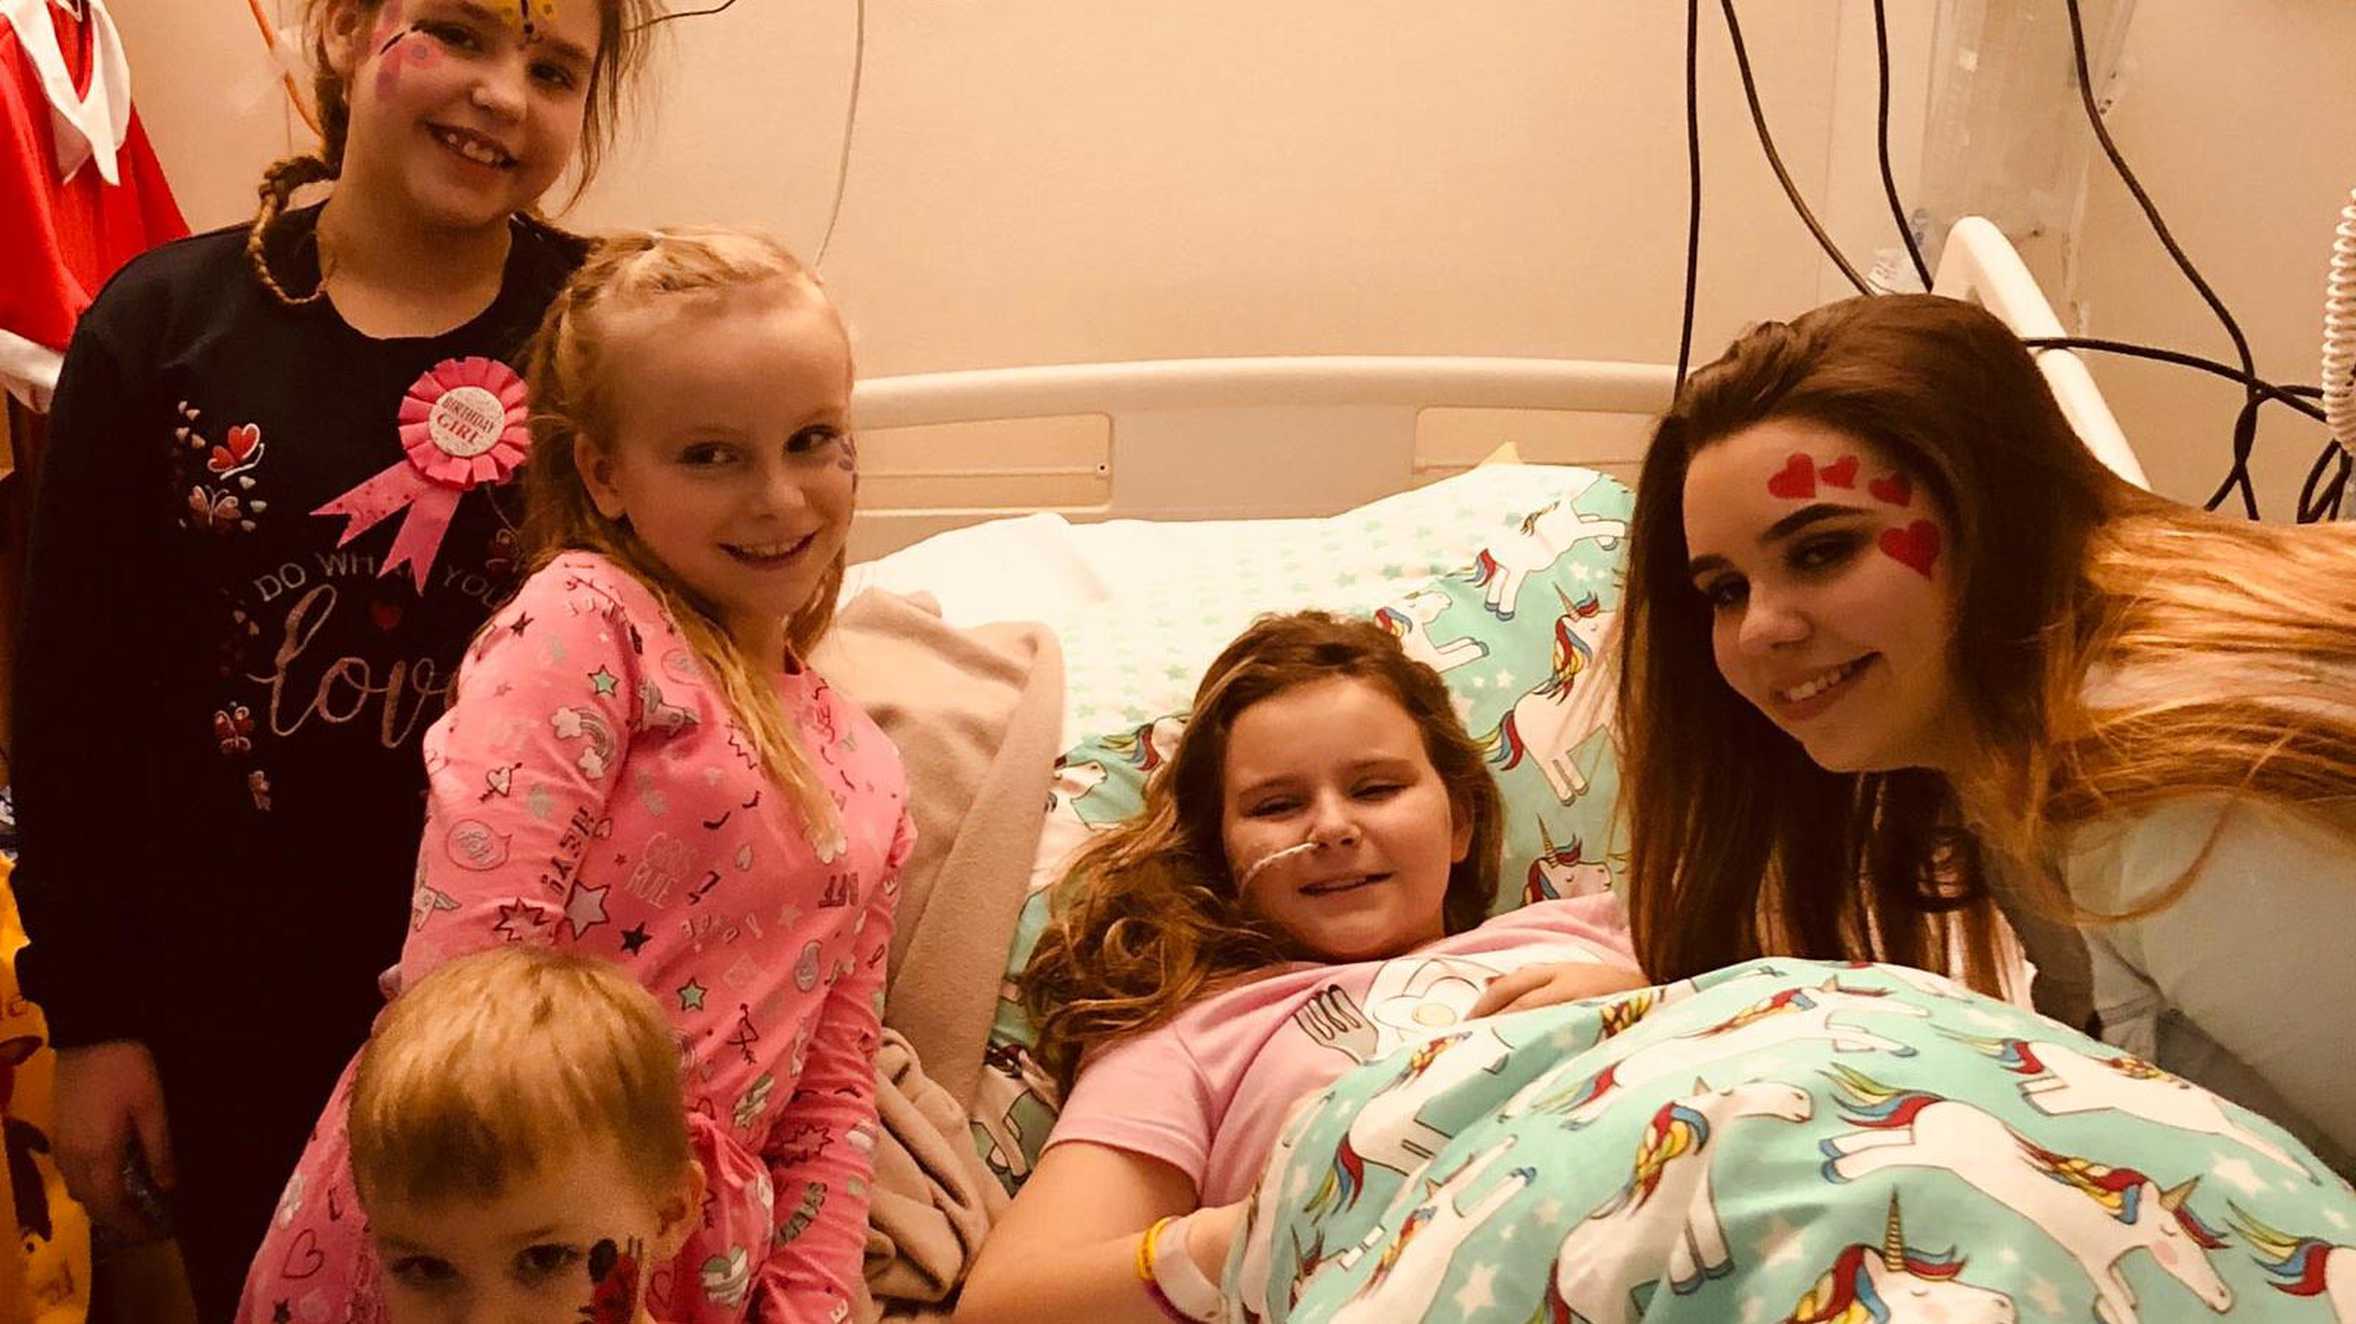 Amy with her friends and family in hospital